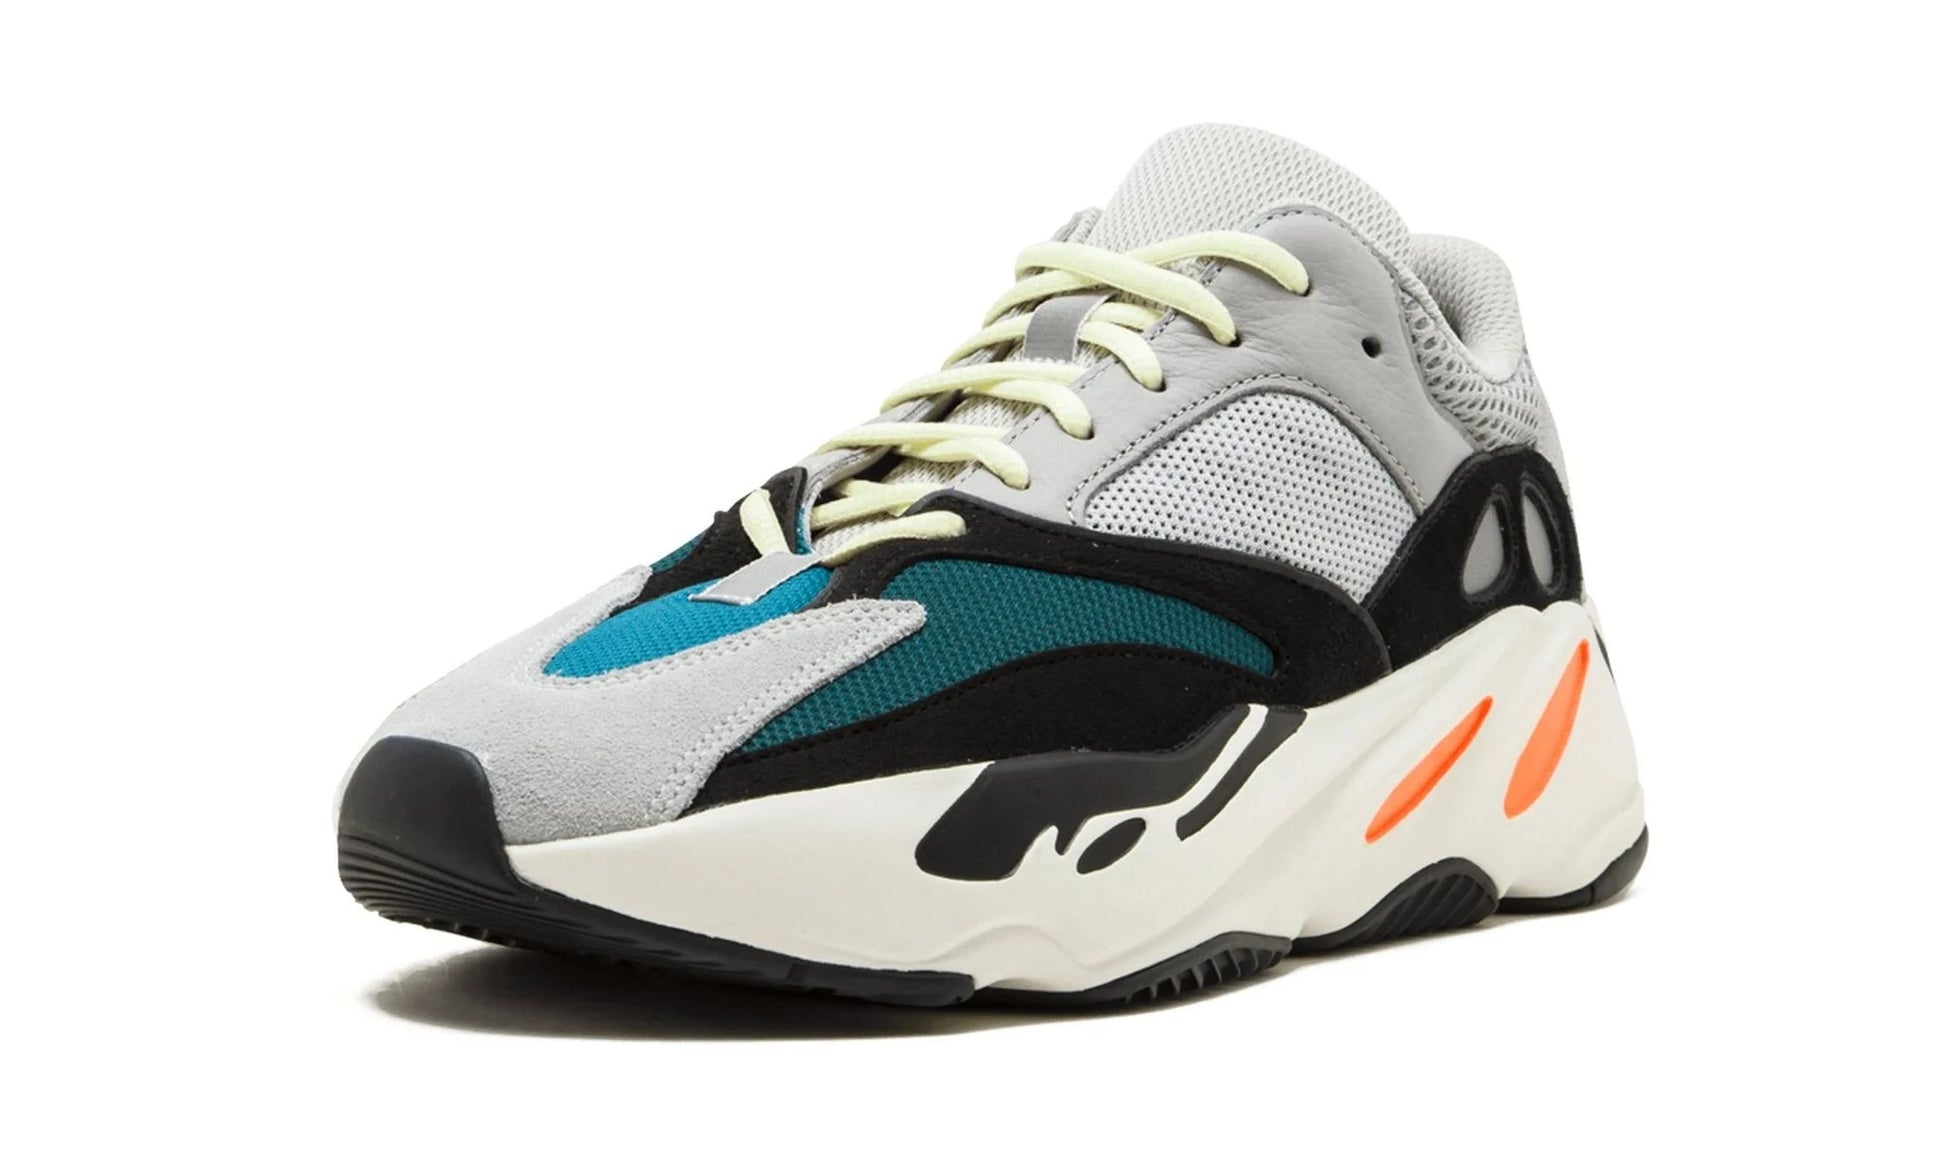 Adidas Yeezy 700 Wave Runner Single Shoe Front VIew